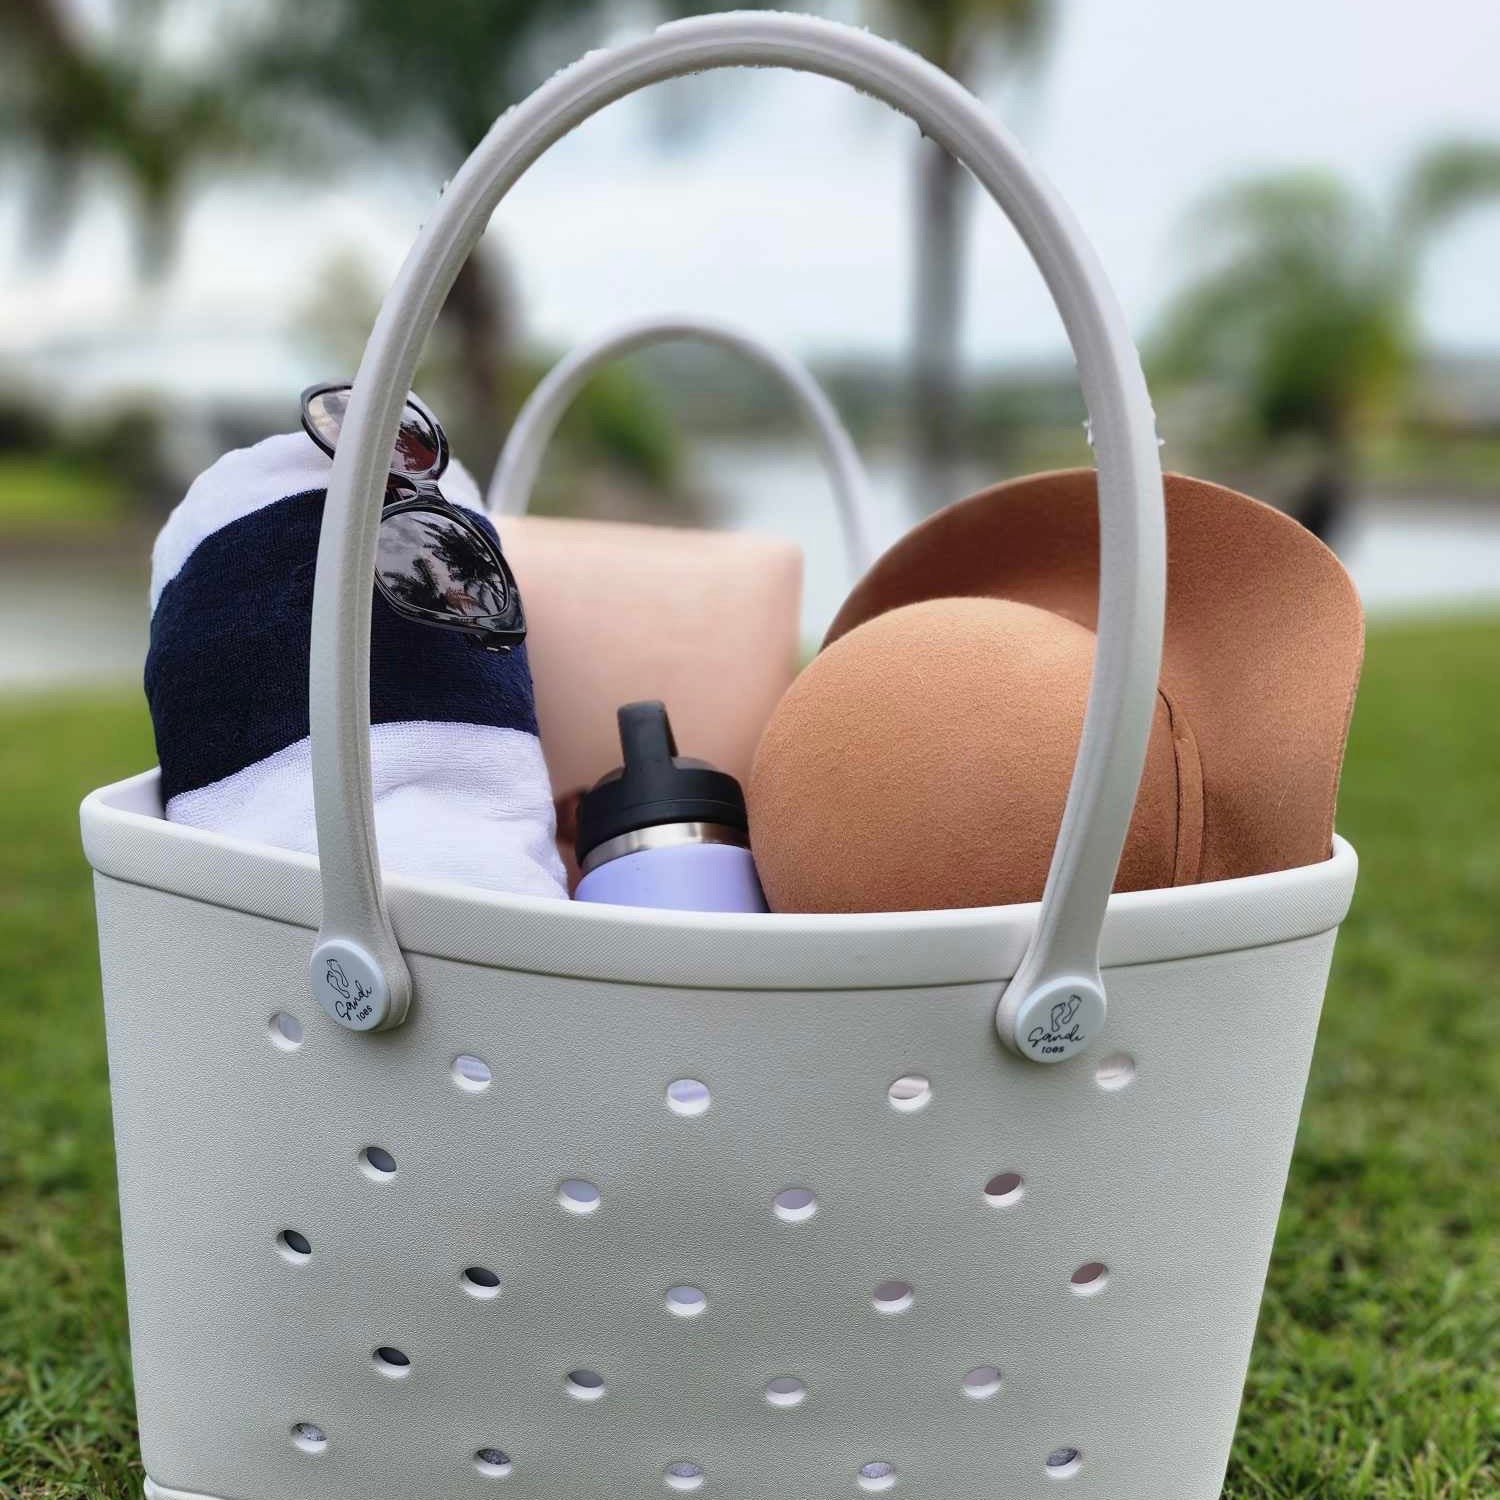 White Haven Silicone Bag (Sandi Toes): Beach Essentials in Style. [Spacious white silicone bag with the Sandi Toes logo holds sunglasses, hat, hoodie, water bottle, and phone - all set for a fun day at the beach.]